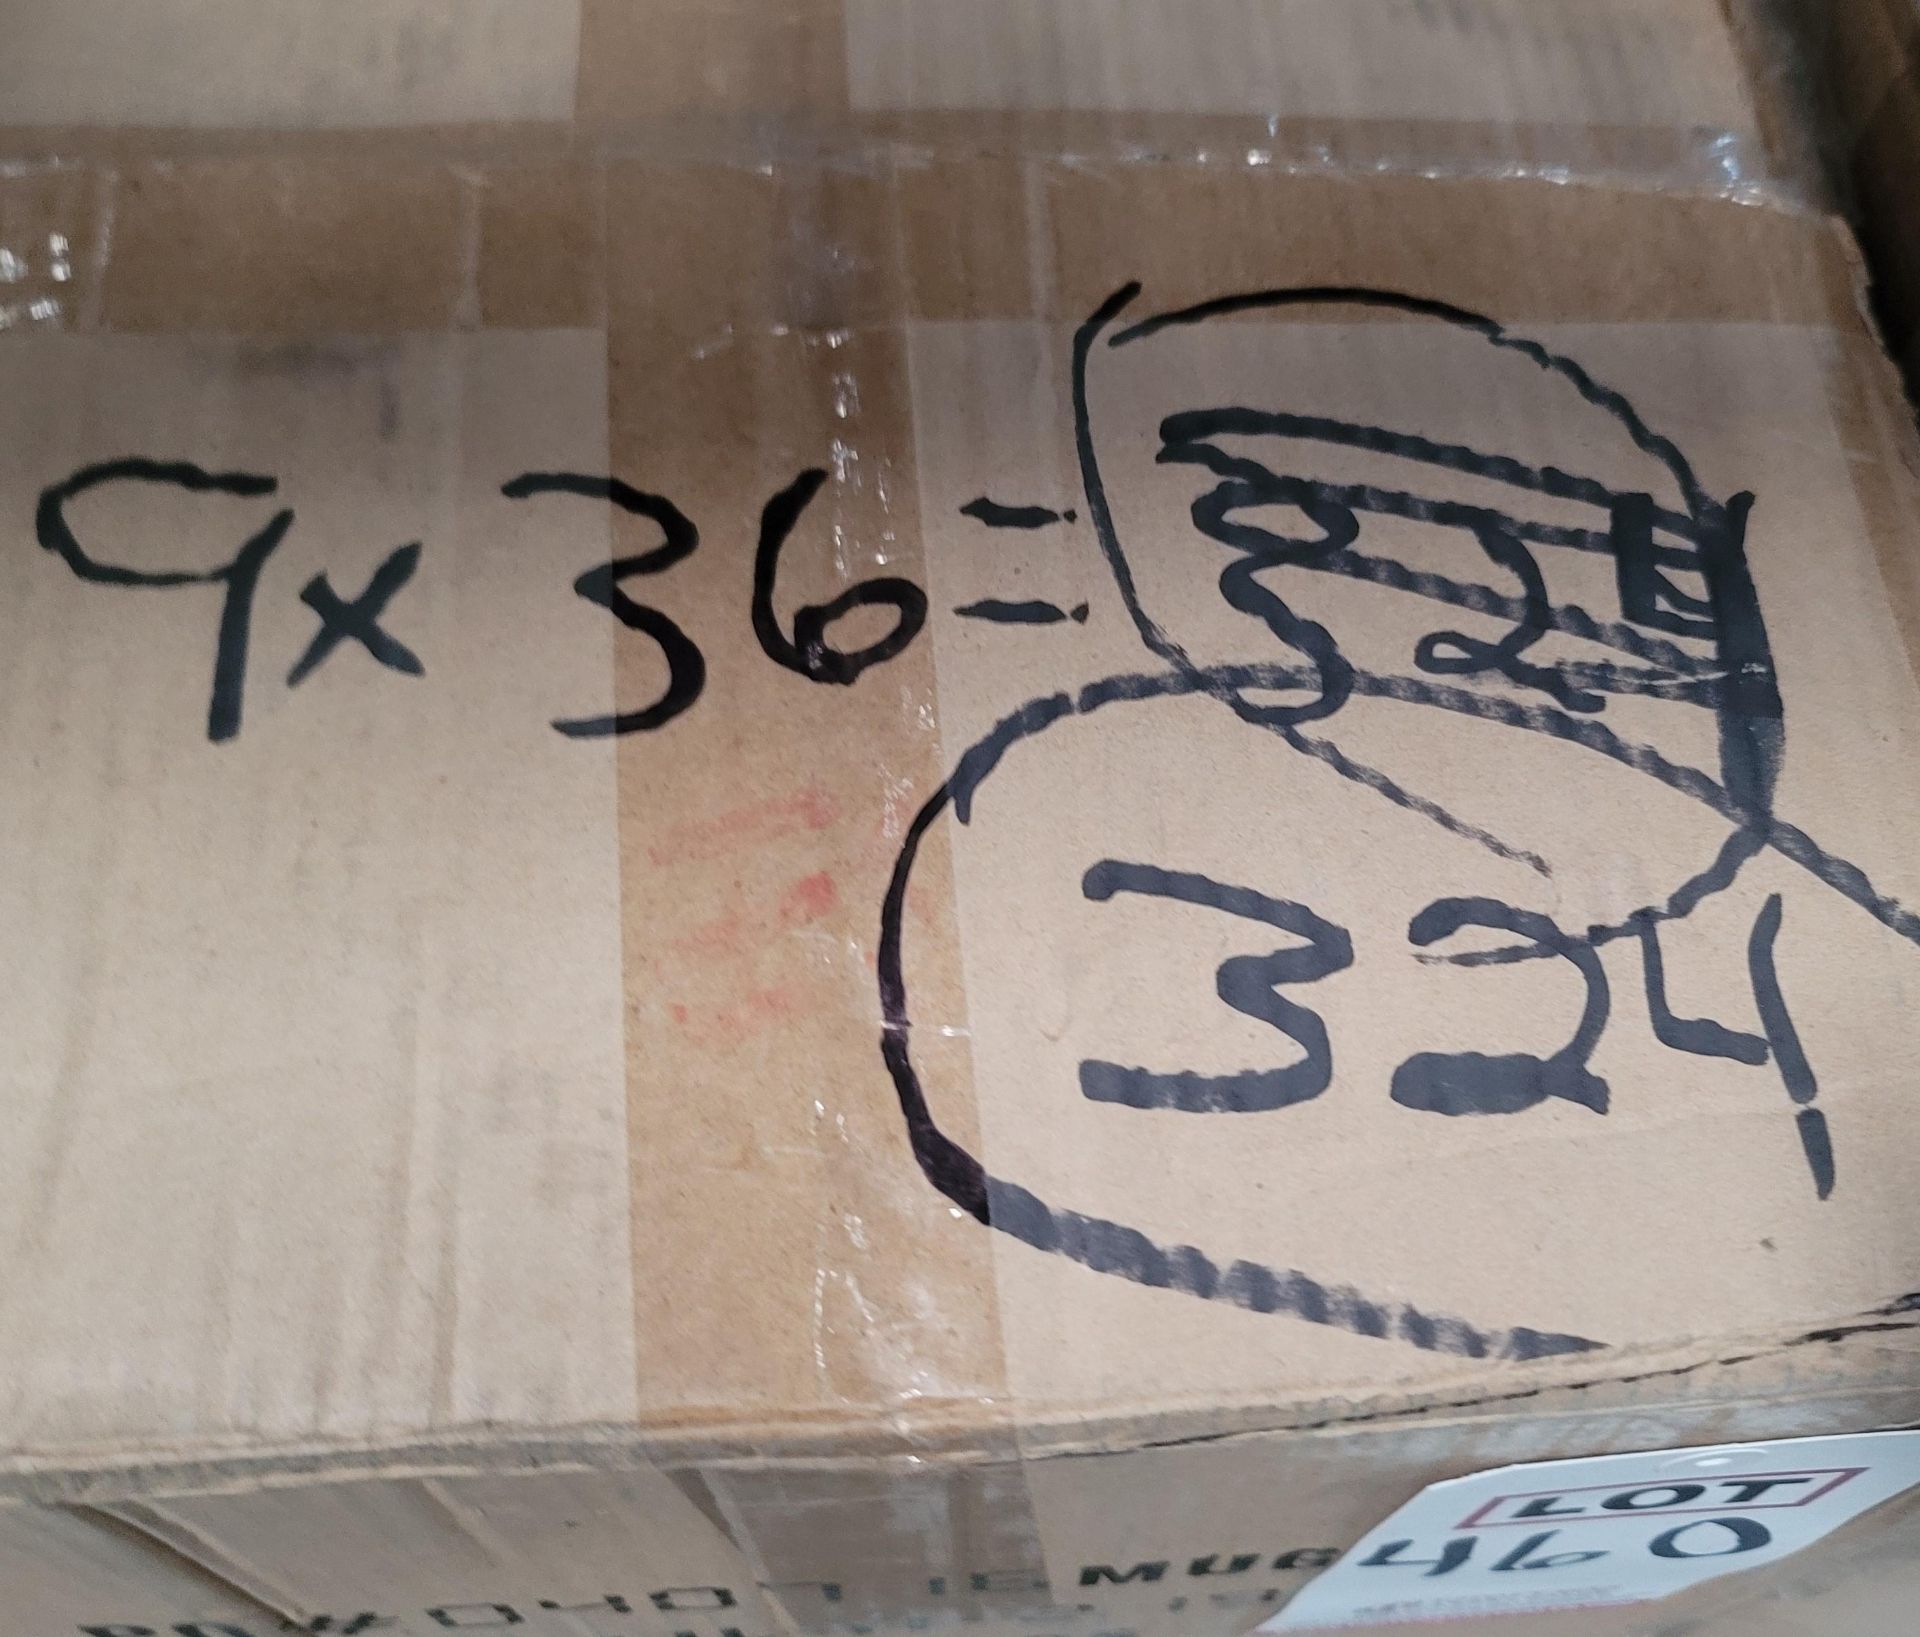 LOT - PALLET OF (324) COFFEE MUG, (9 CASES/36 PER CASE) - Image 2 of 4